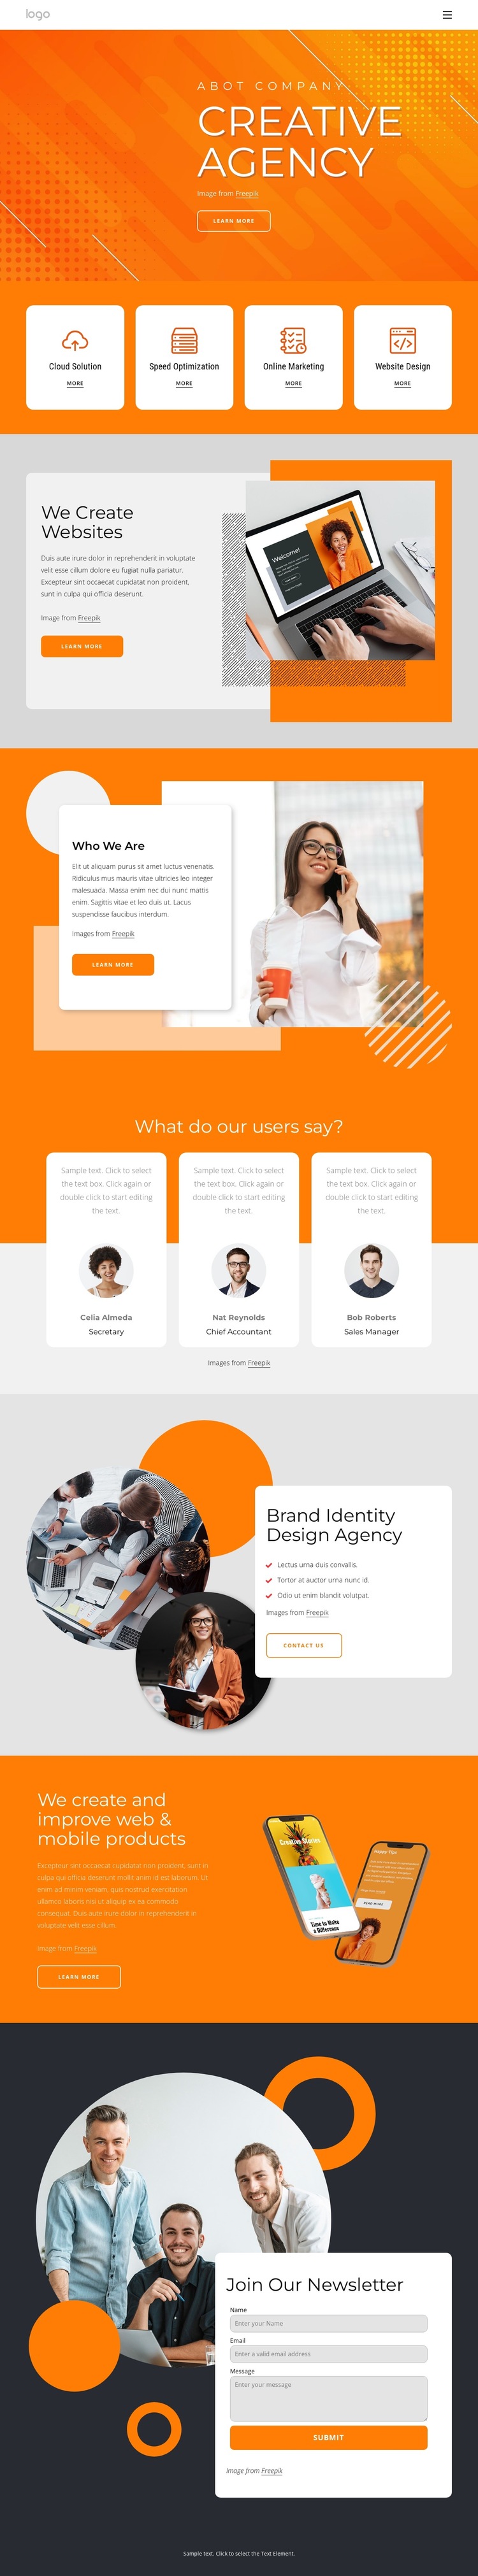 The creative agency for your next big thing HTML5 Template